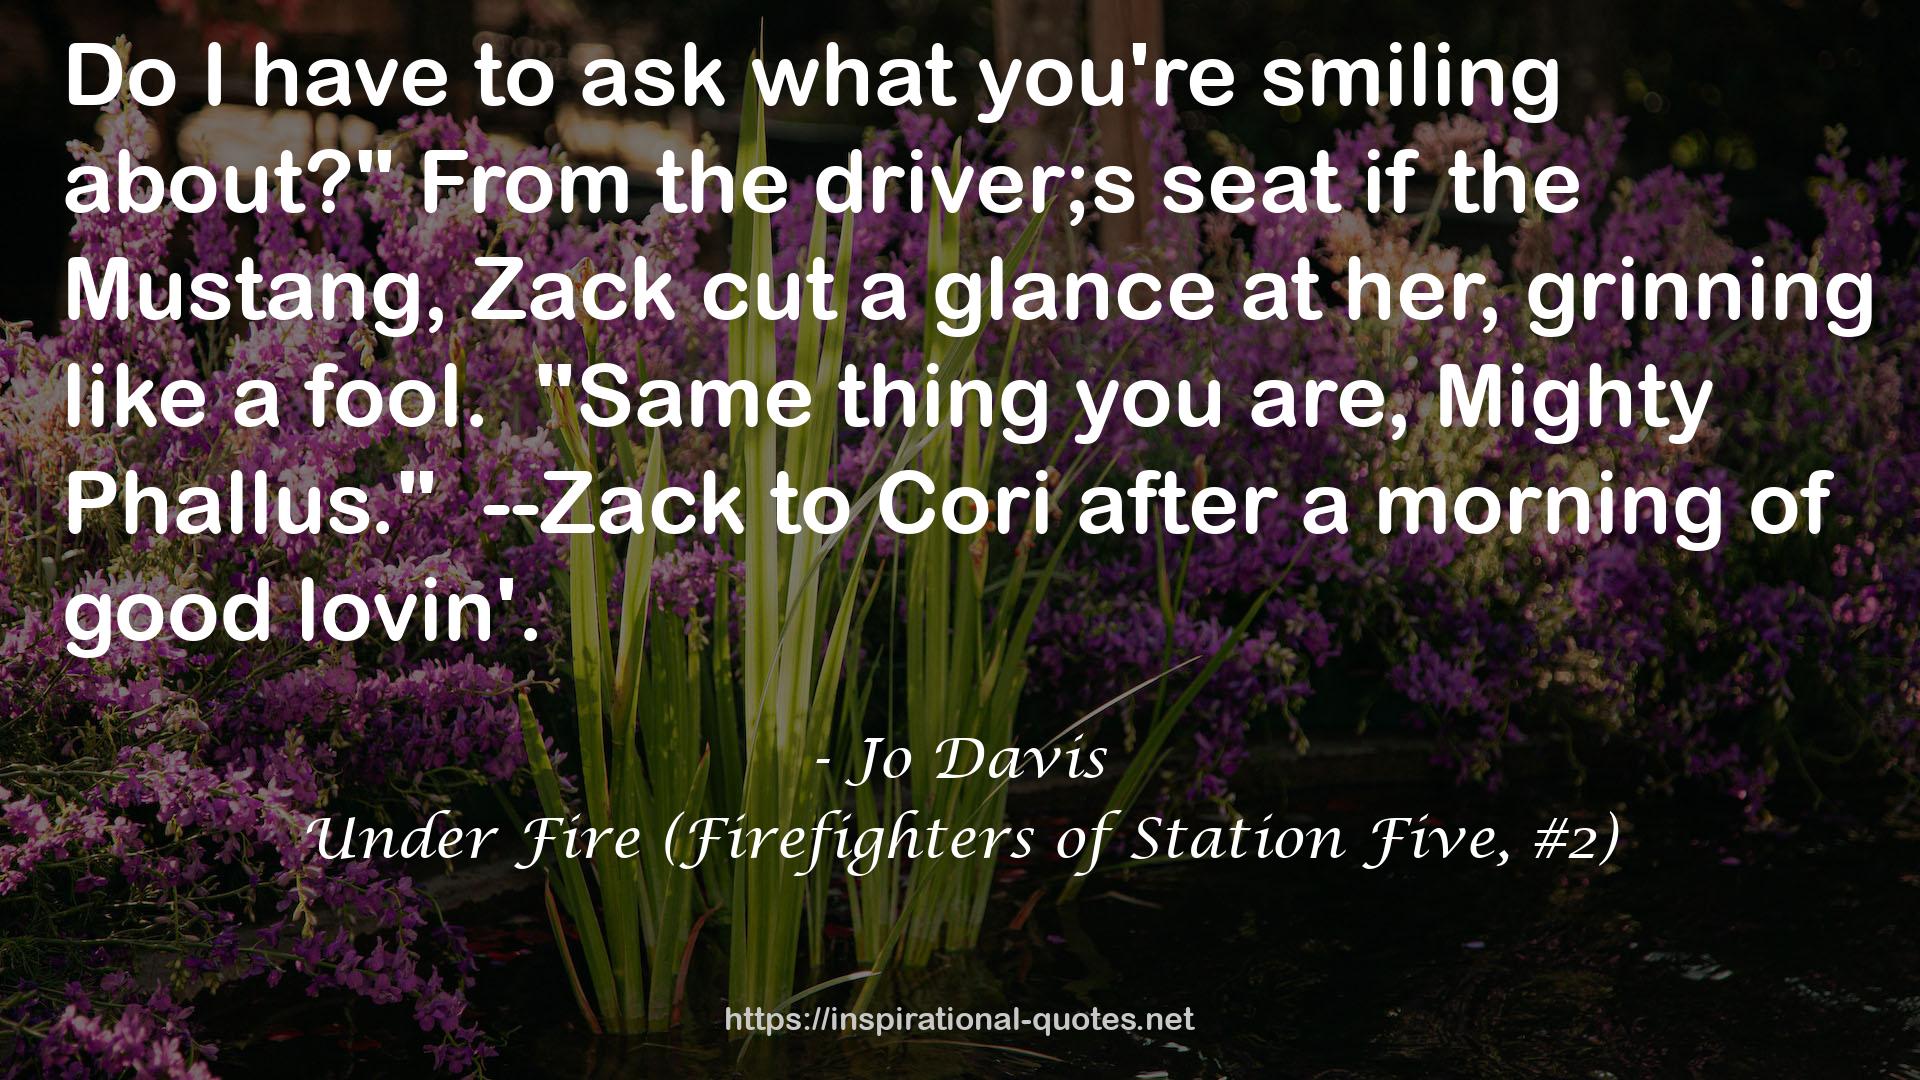 Under Fire (Firefighters of Station Five, #2) QUOTES